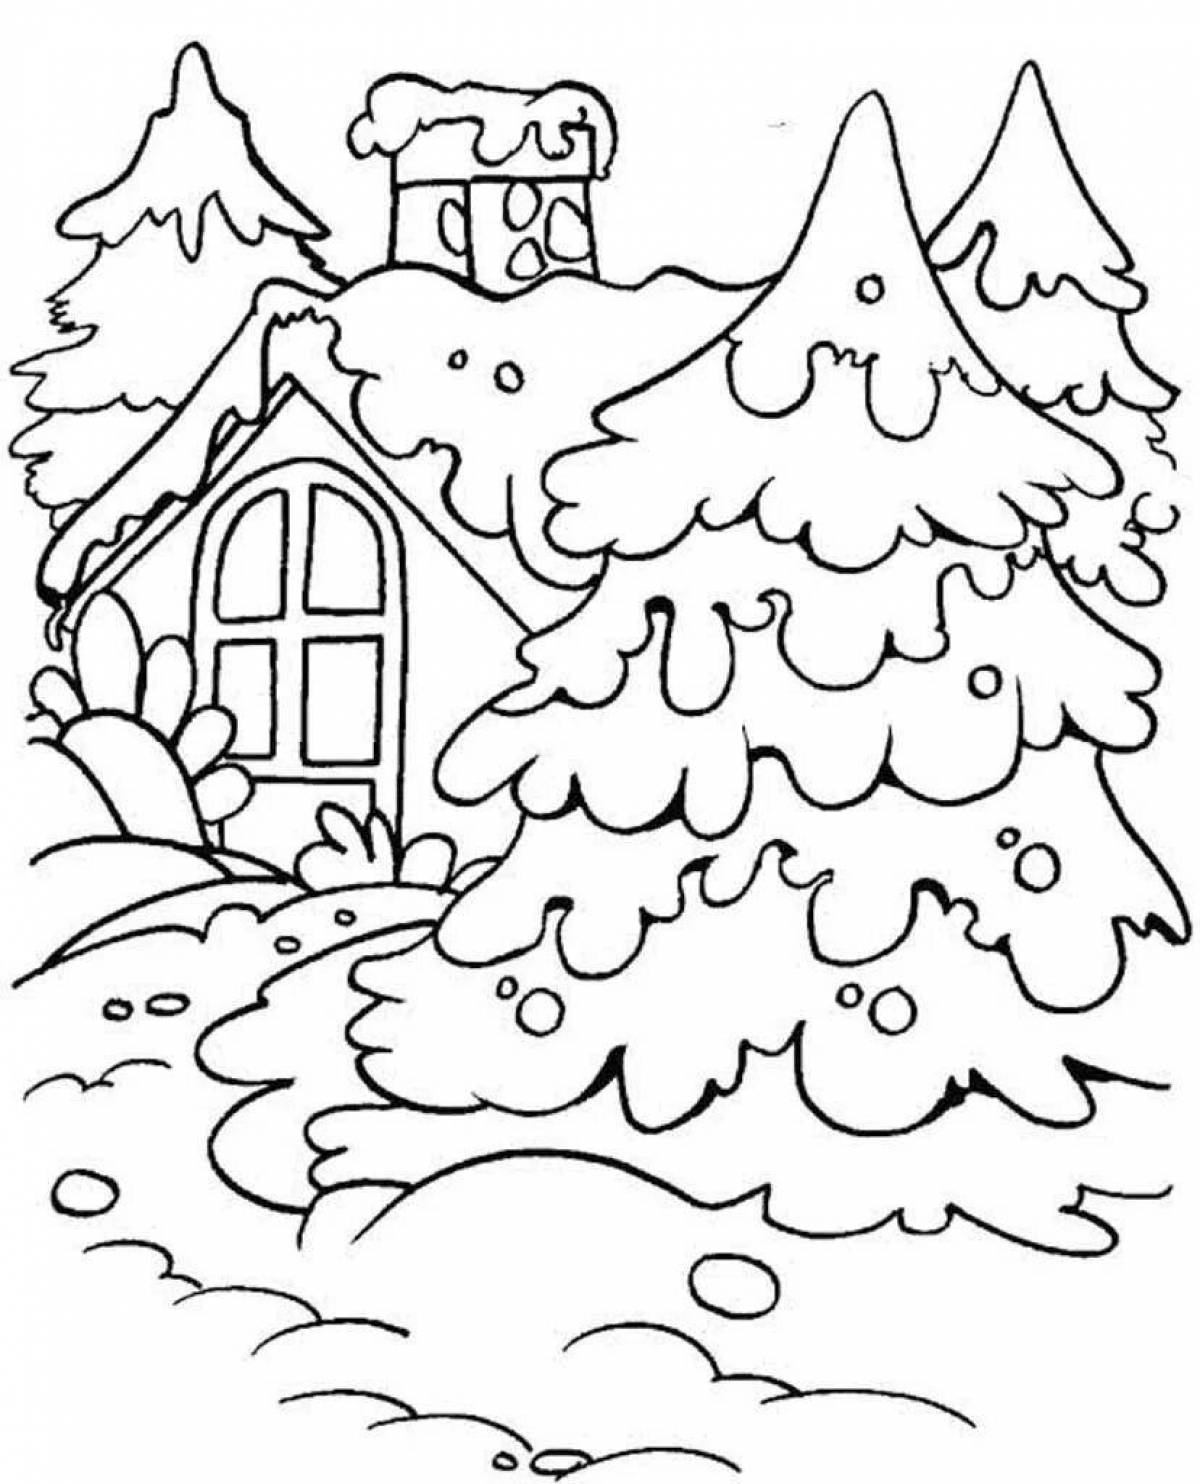 Bright winter landscape coloring book for children 7 years old